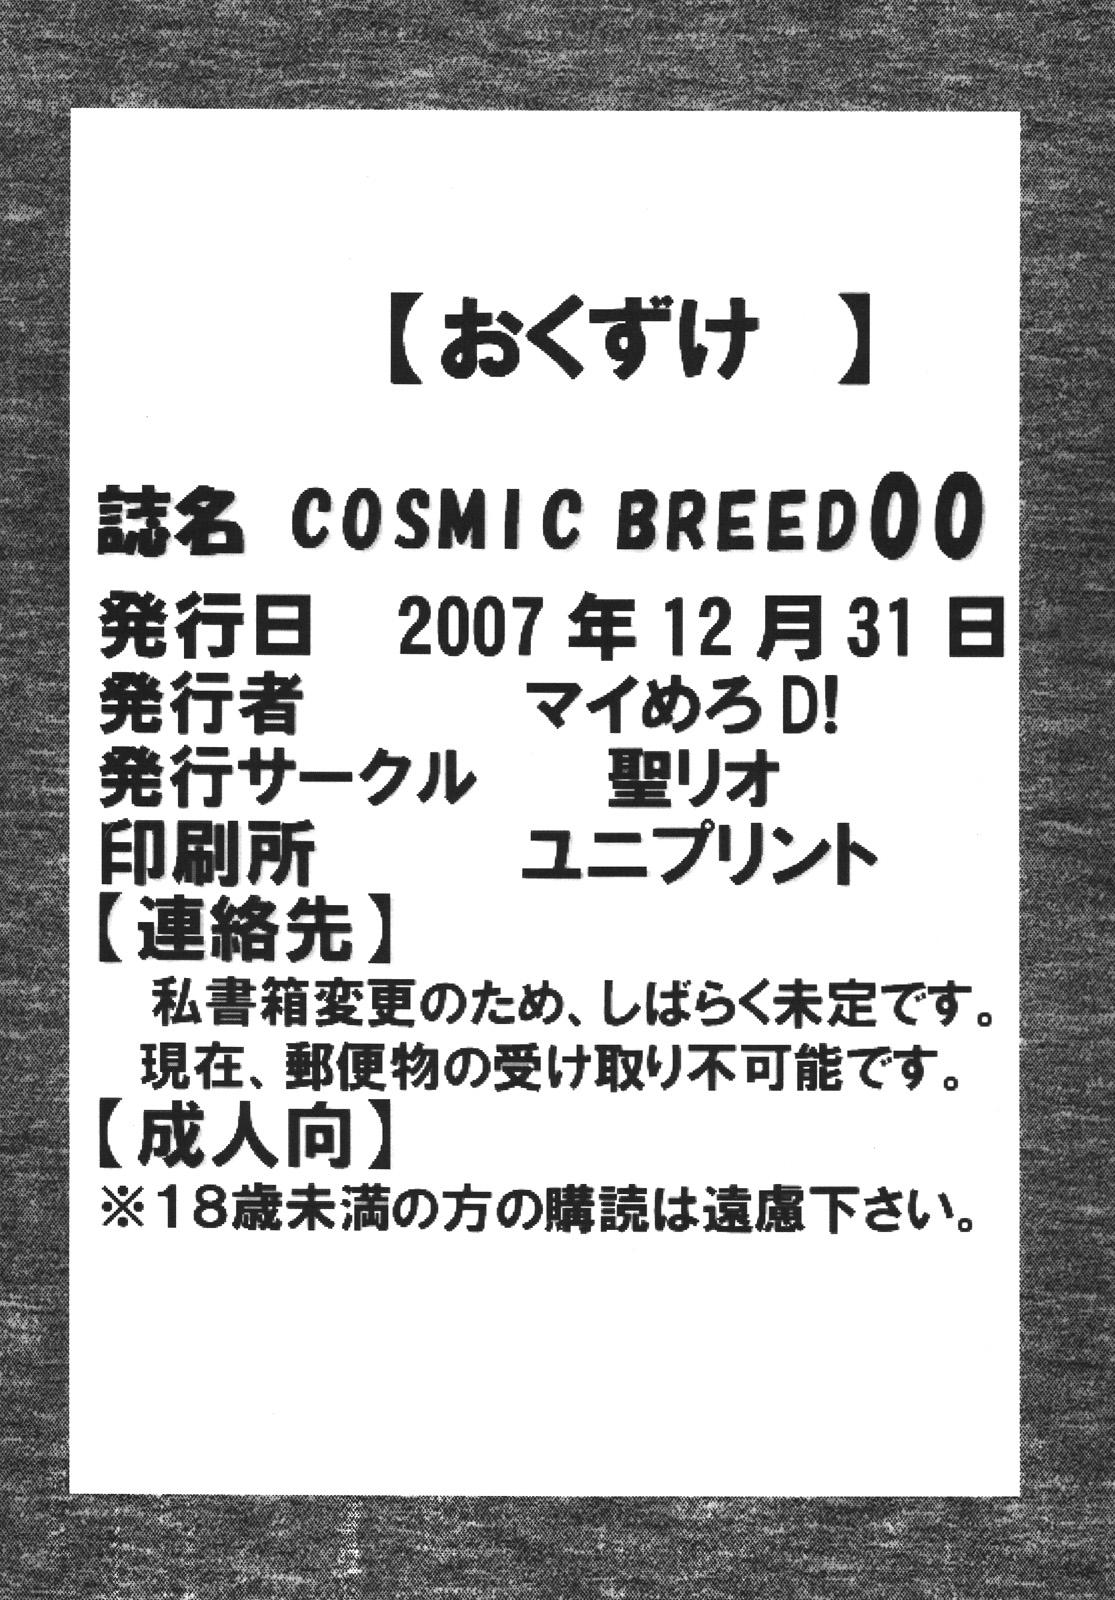 Compilation COSMIC BREED 00 - Gundam 00 Firsttime - Page 49